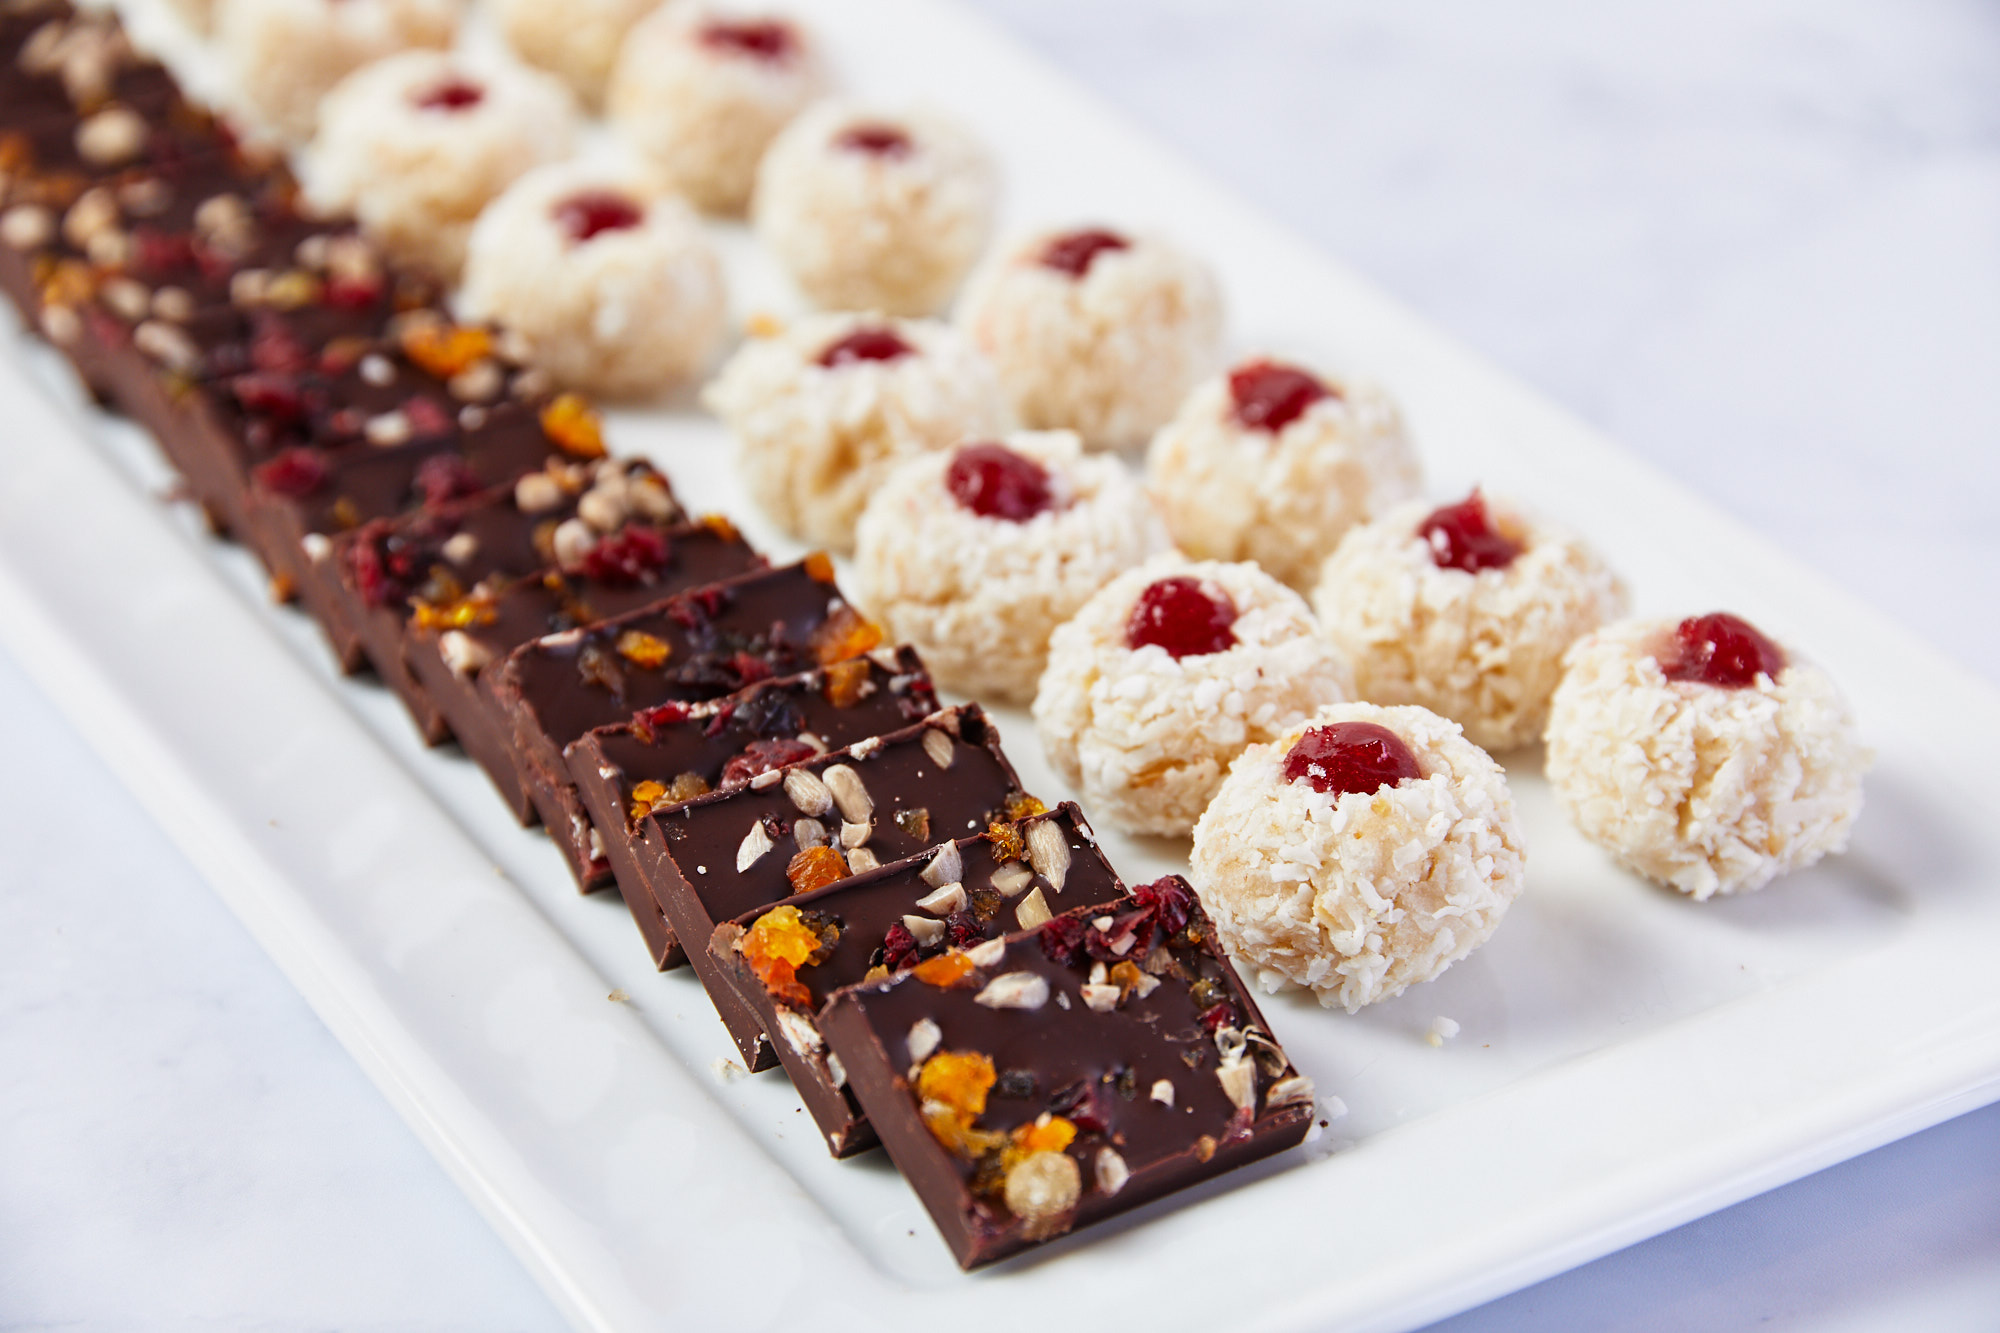 Butlered Sweets: Chocolate Fruit Mendiant, Cherry Coconut Macaroons